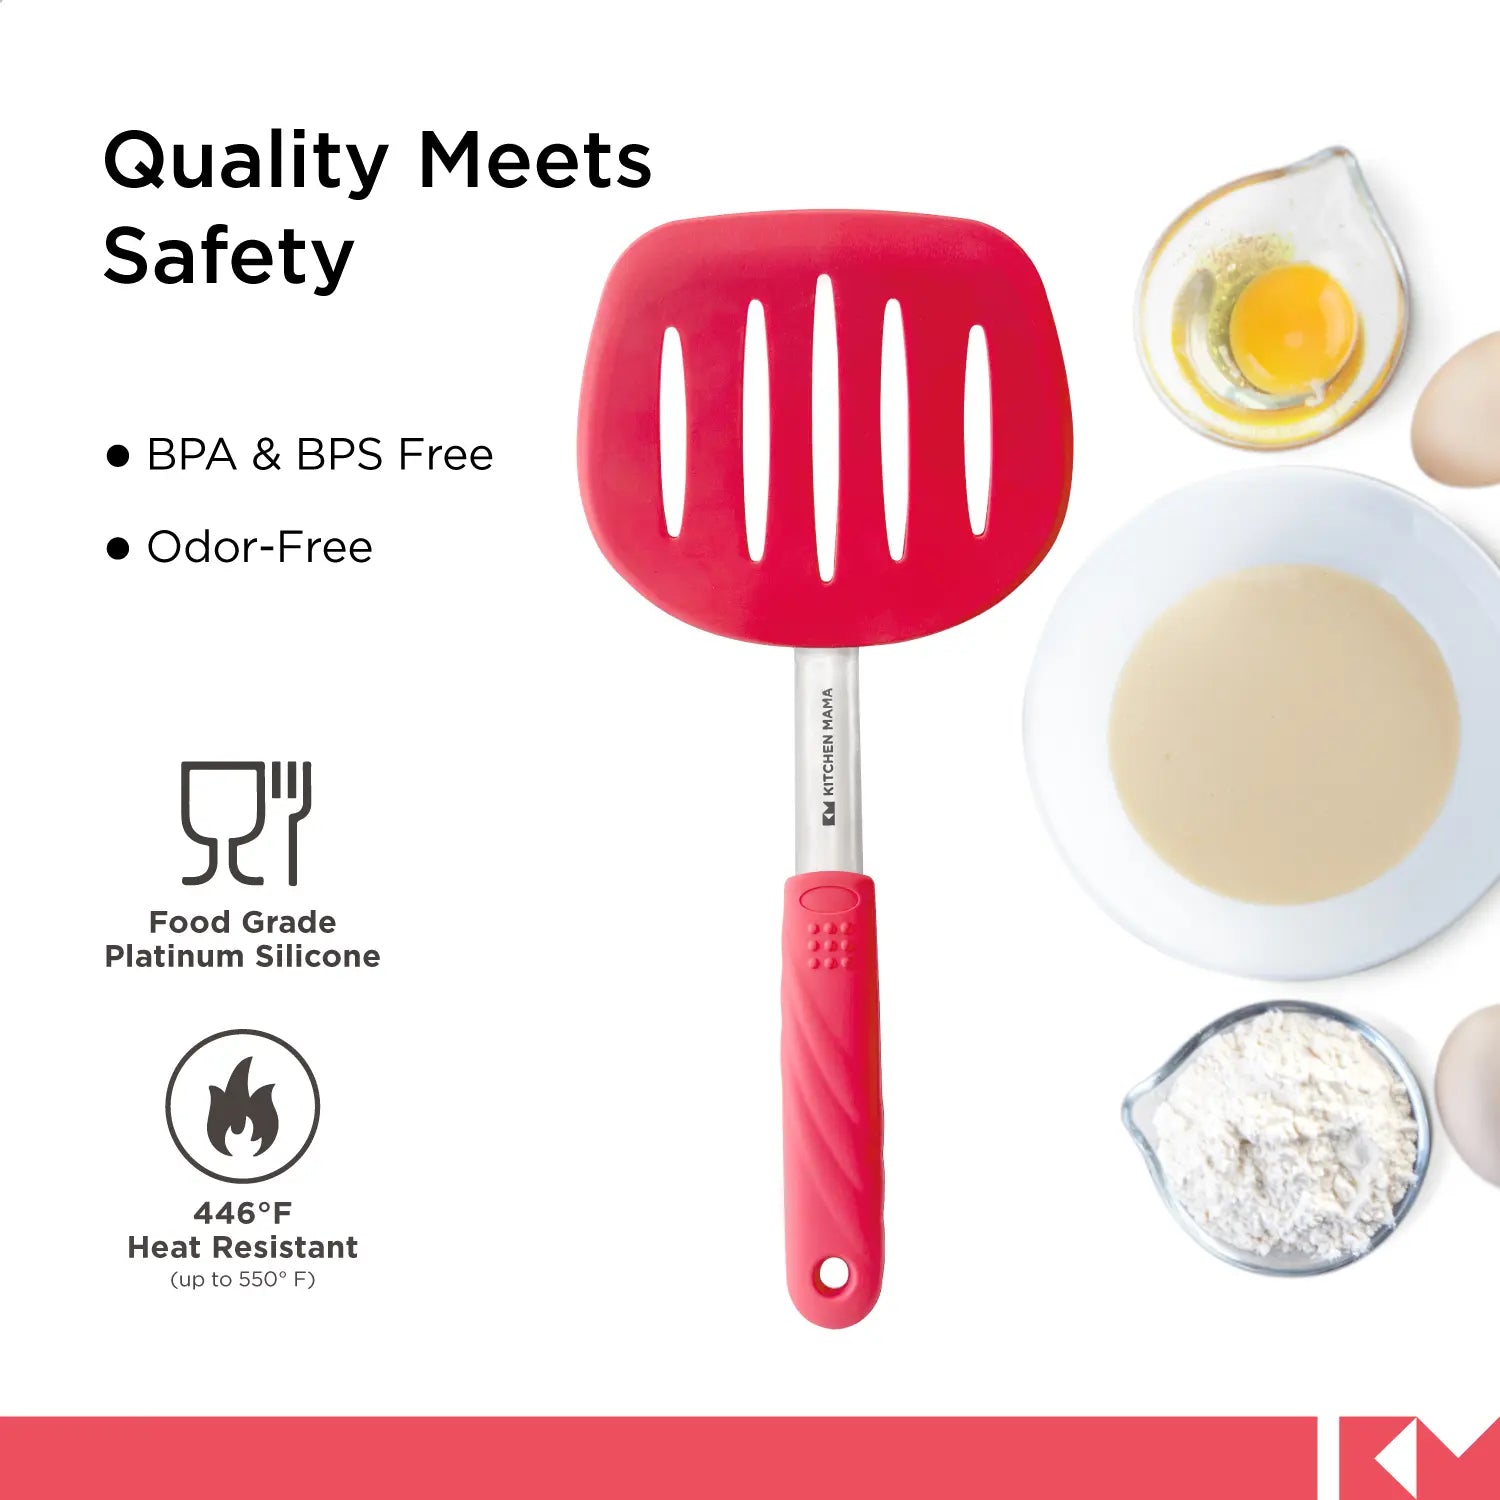 Platinum Silicone Pancake Turner - Heat-Resistant Wide & Slotted Spatula, SP0510-R, quality meets safety, BPA and BPS free, Odor-Free, food grade platinum silicone